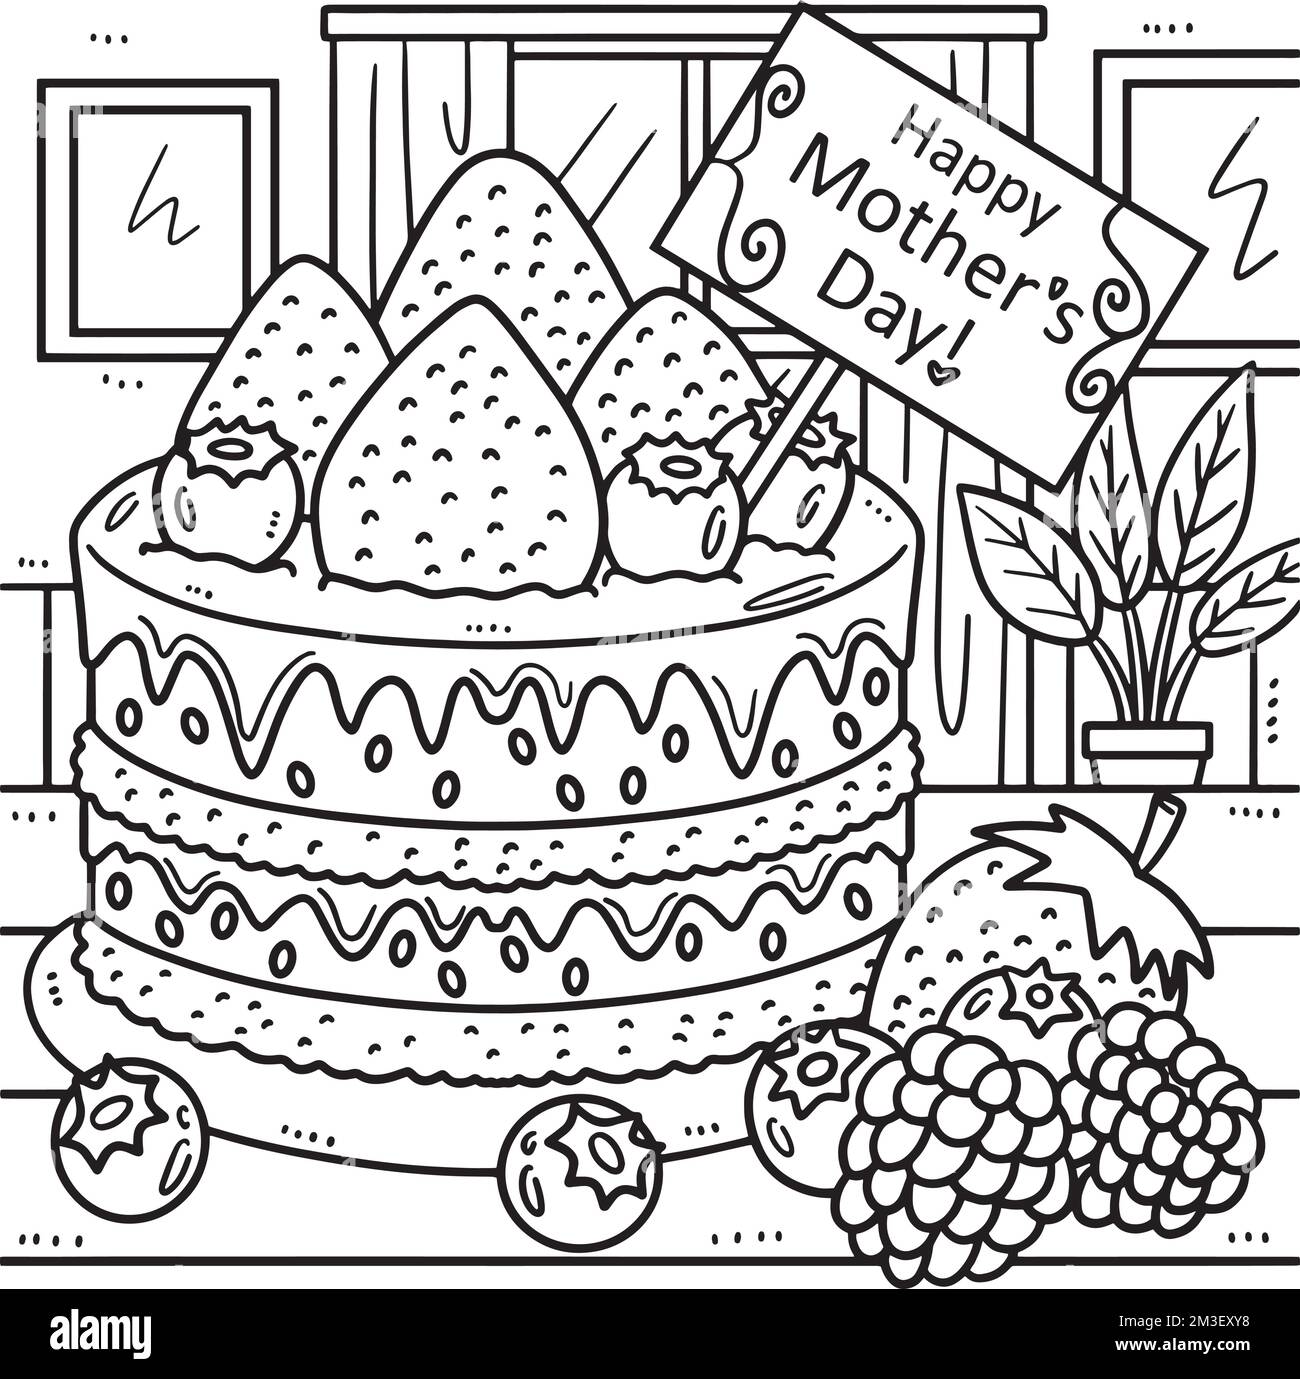 Mothers Day Cake Coloring Page for Kids Stock Vector